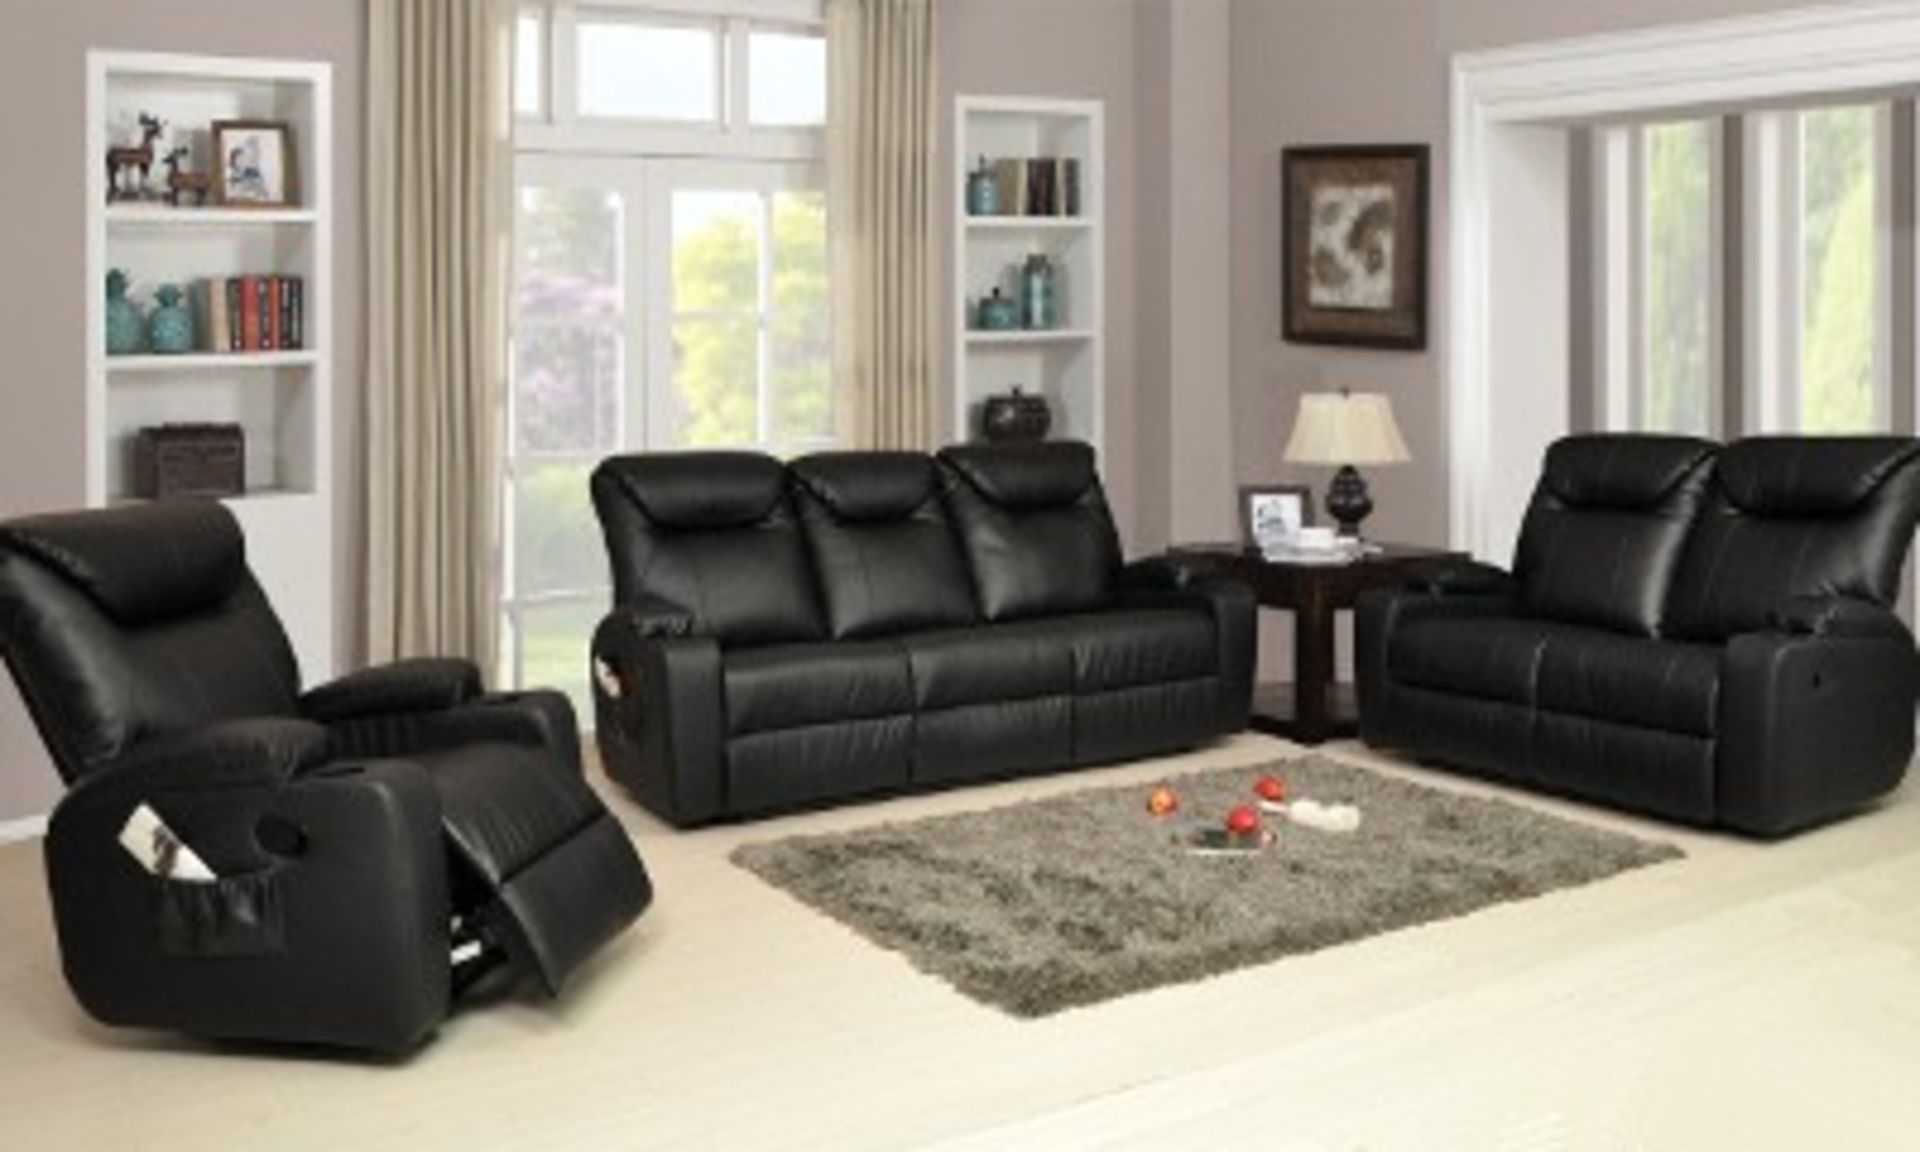 Brand new boxed direct from the manufacturers 3 seater and 2 arm chairs lazy boy in black